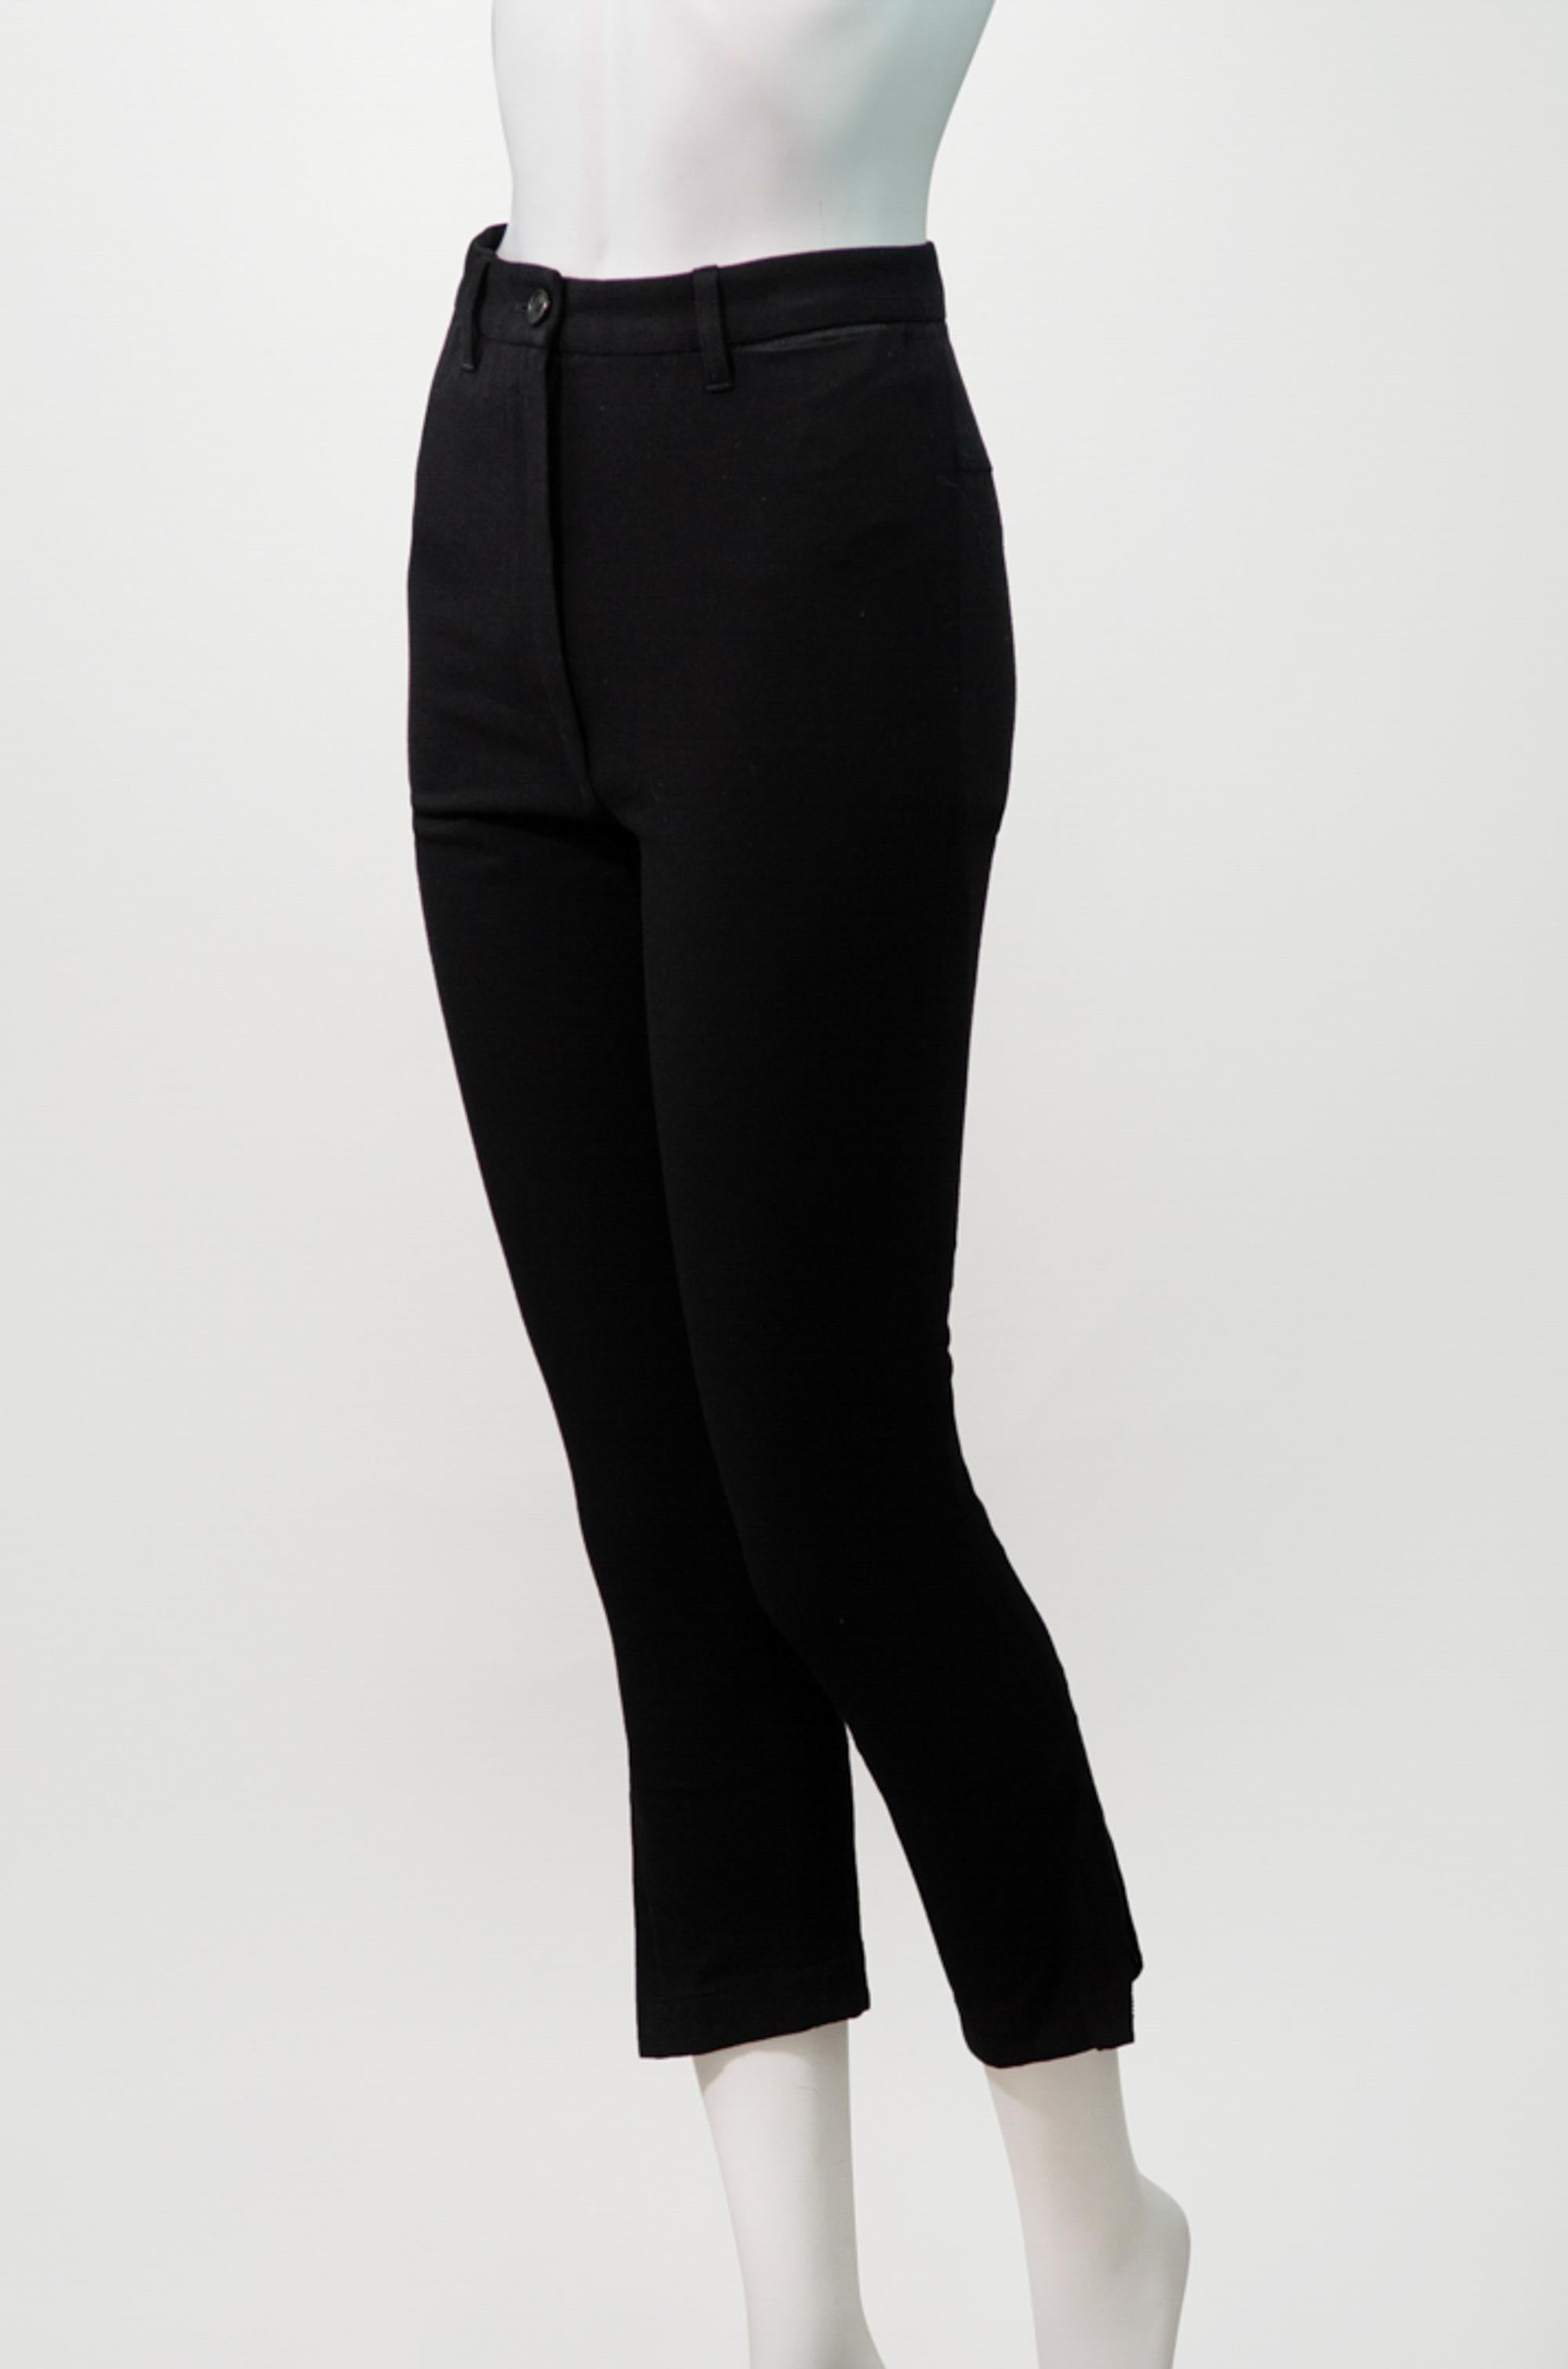 Super chic cigarette style pants by Belgian designer Ann Demeulemeester.

These gorgeous cotton blend slim feature a flattering high waist. Very fitted, the fabric has a slight stretch while still being firm and holding you in, they close with a